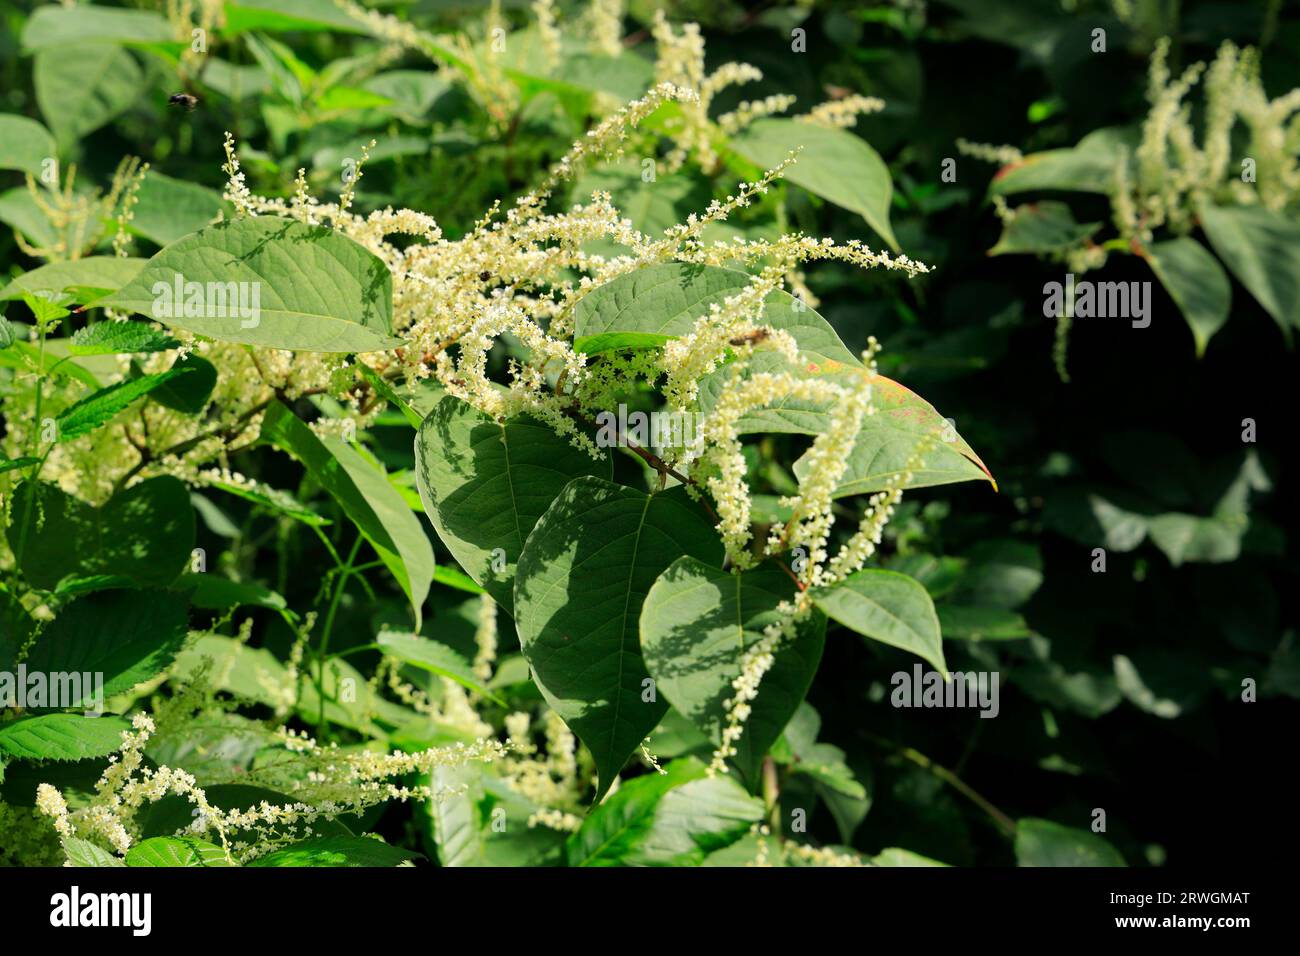 Giapponese knotweed Reynoutria japonica, in fiore, settembre. Foto Stock